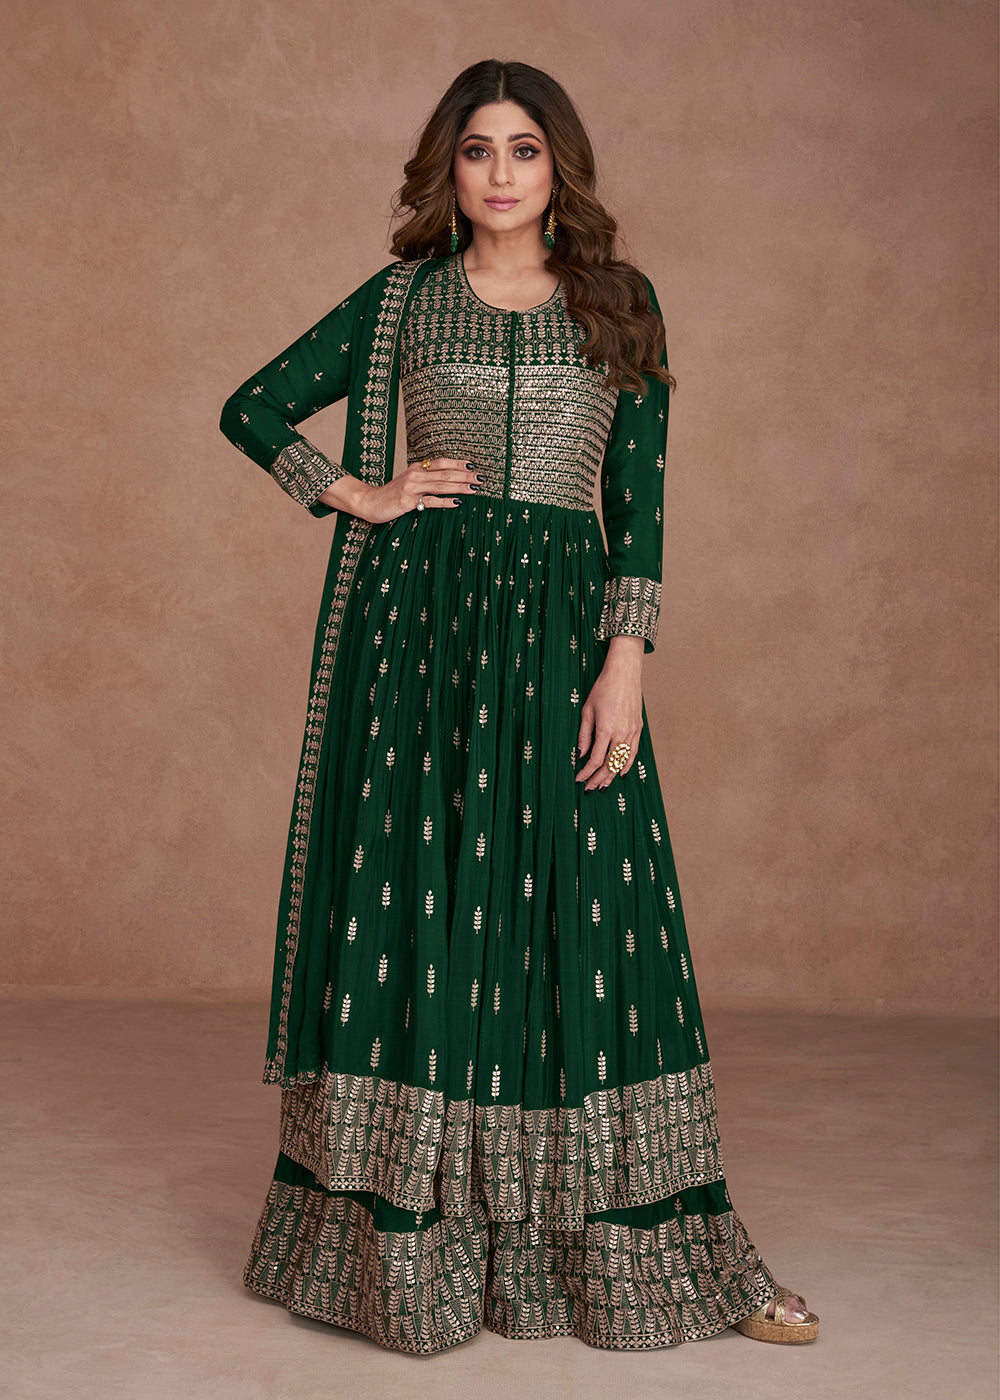 Buy Now Festive Look Gorgeous Green Zari Embroidered Palazzo Suit Online in USA, UK, Canada, Germany, Australia & Worldwide at Empress Clothing.